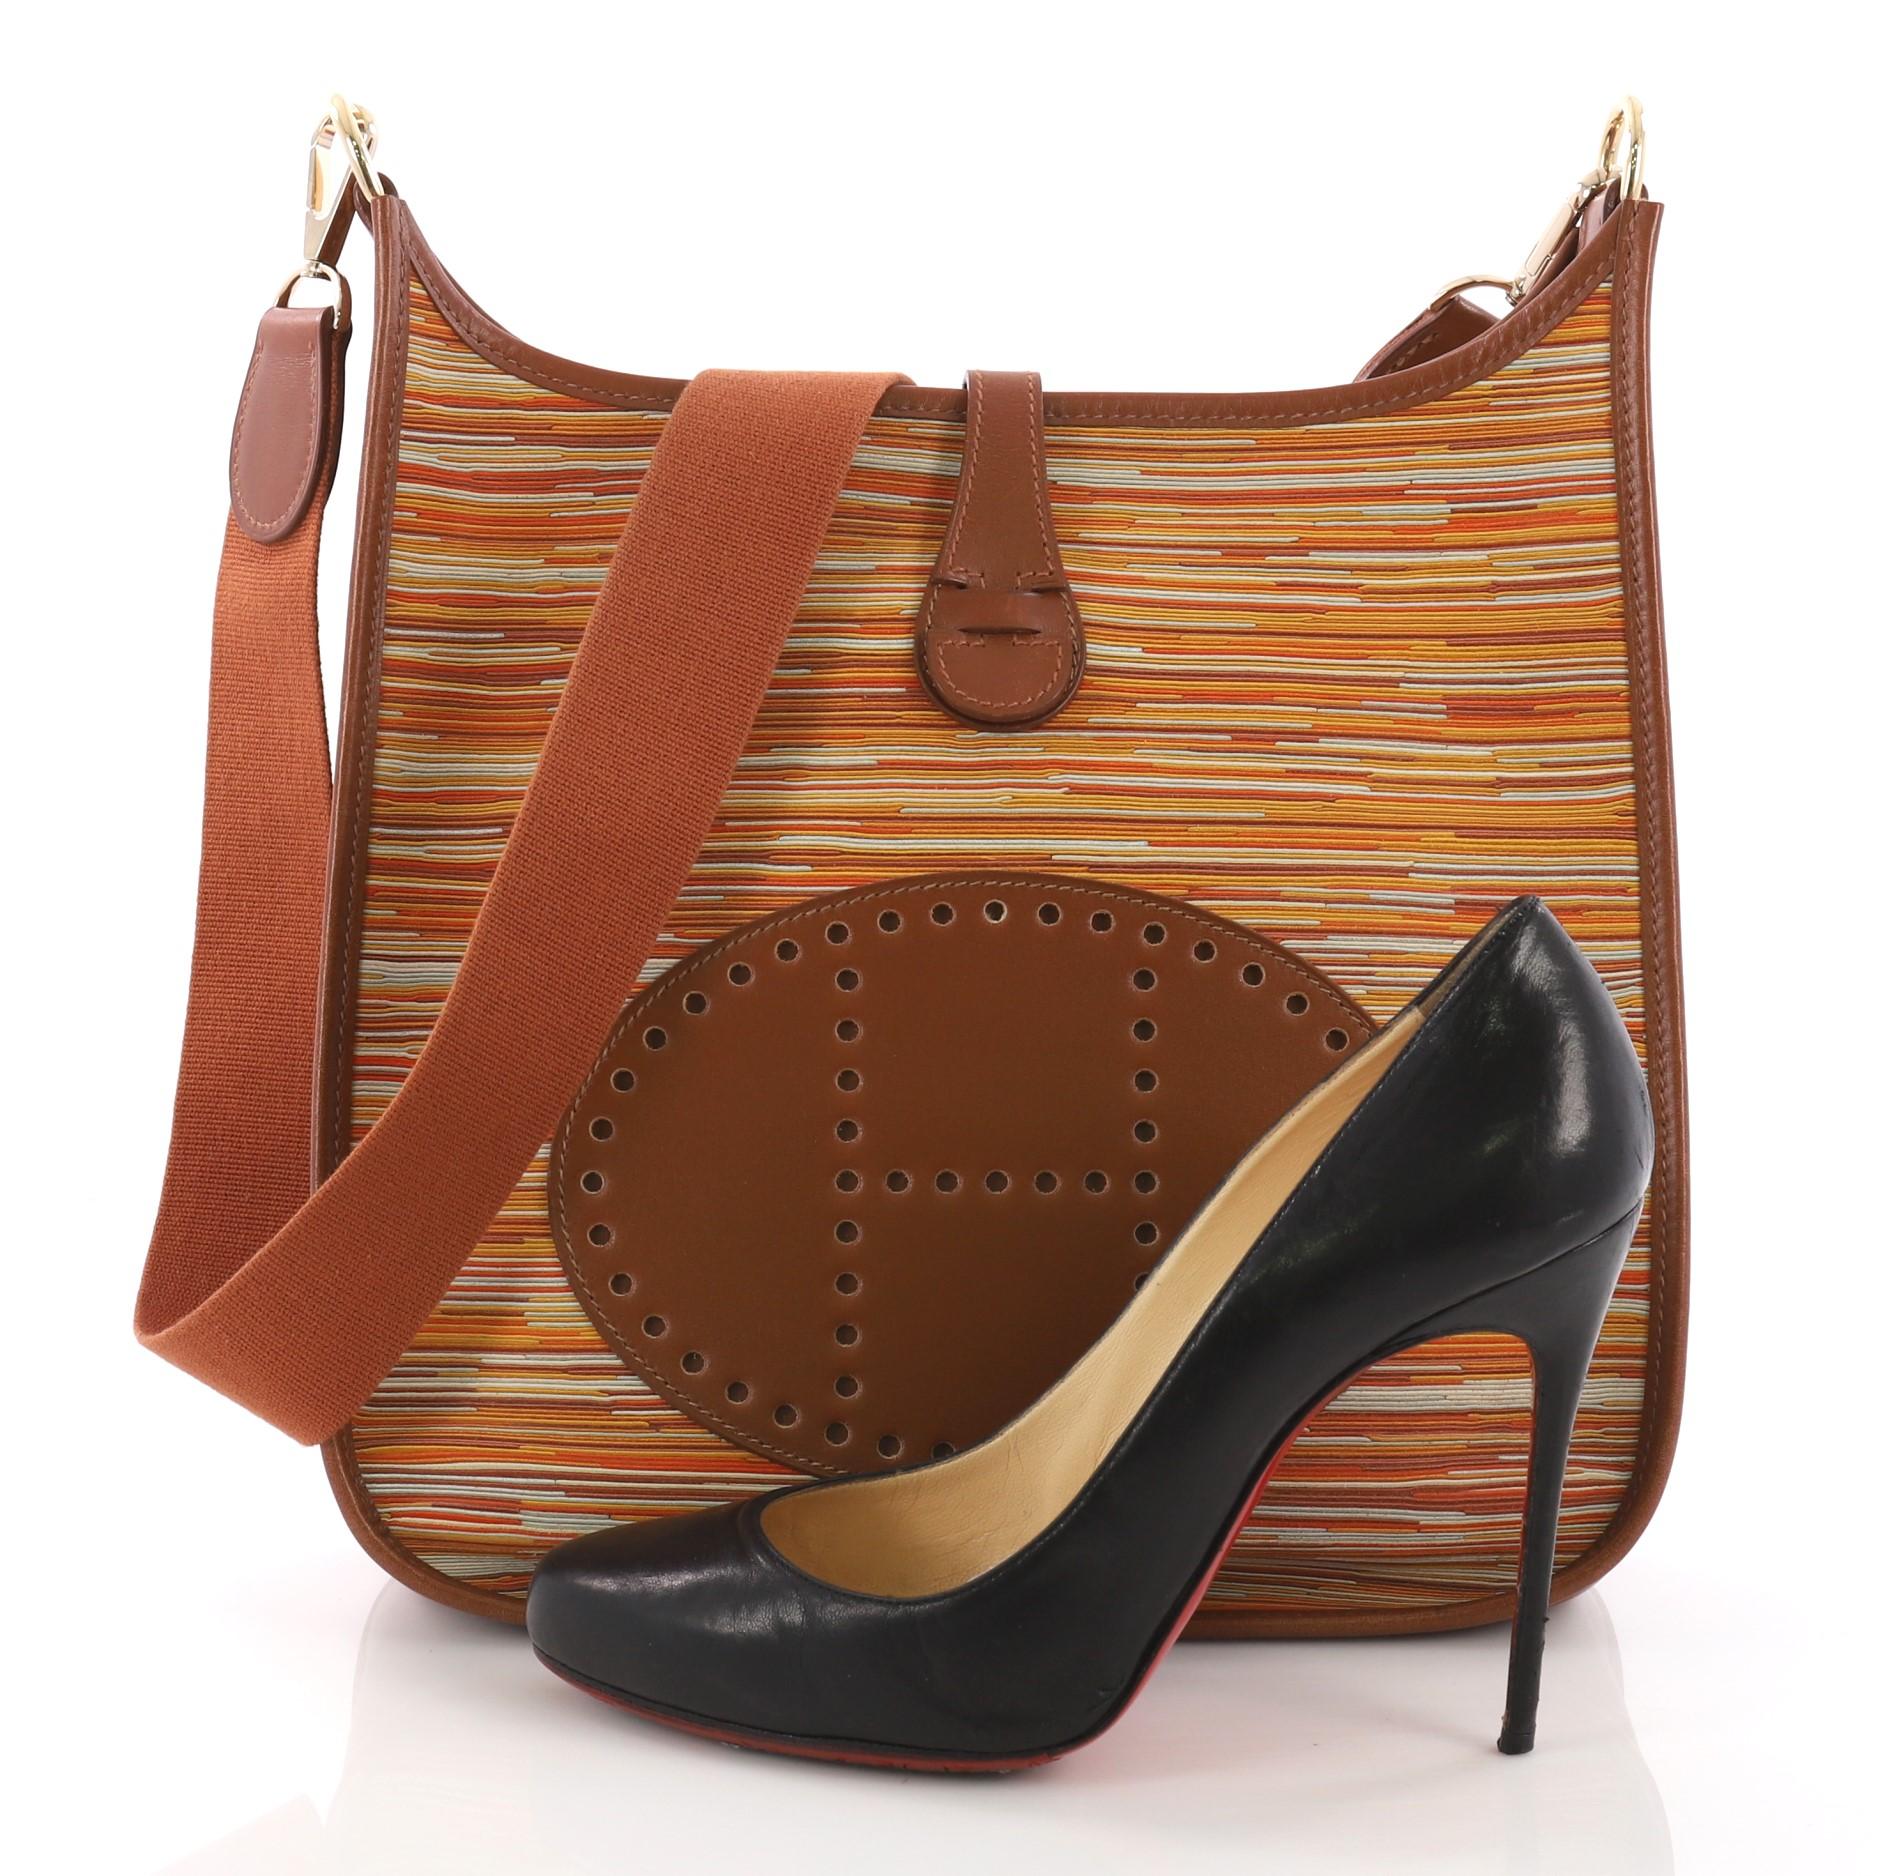 This Hermes Evelyne Crossbody Gen I Vibrato and Box Calf PM, crafted from brown multicolor vibrato and barenia, features a signature perforated H design at the front, textile shoulder strap, and gold-tone hardware. It opens to a brown leather